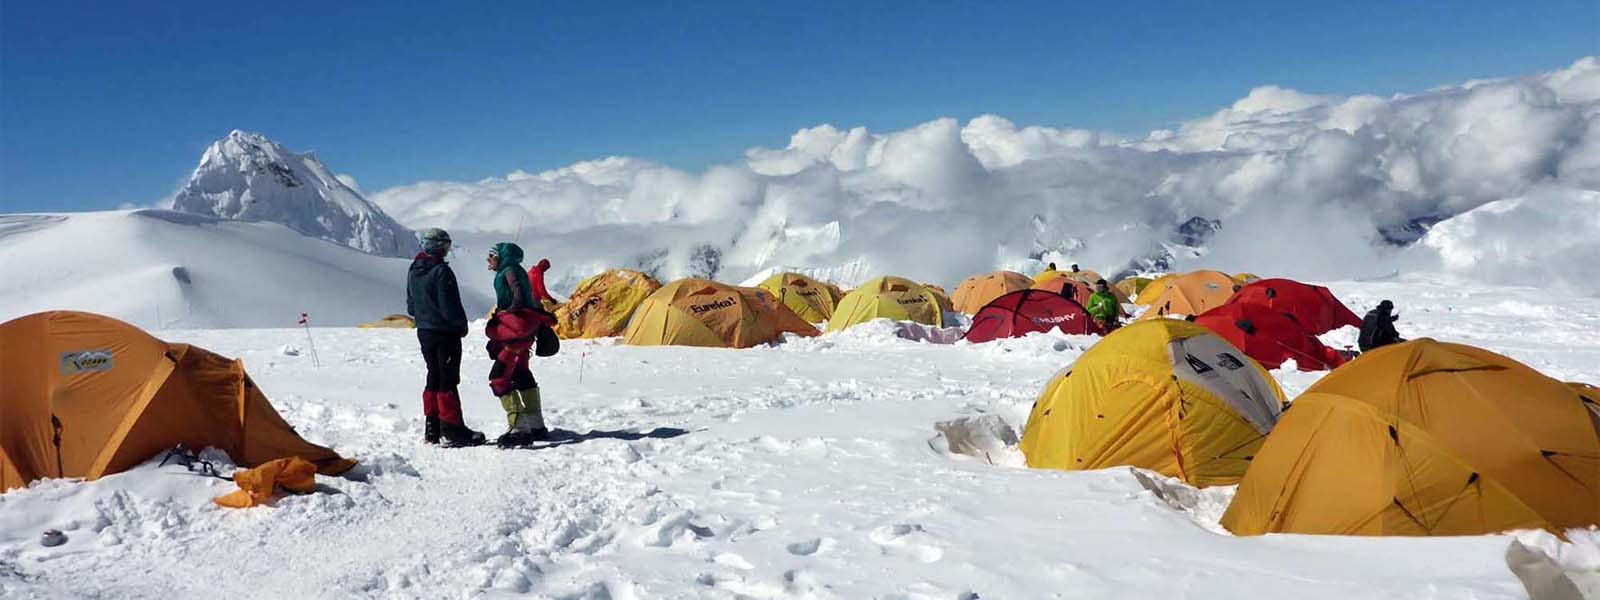 Mt. Cho Oyu Expedition Infromation Nepal